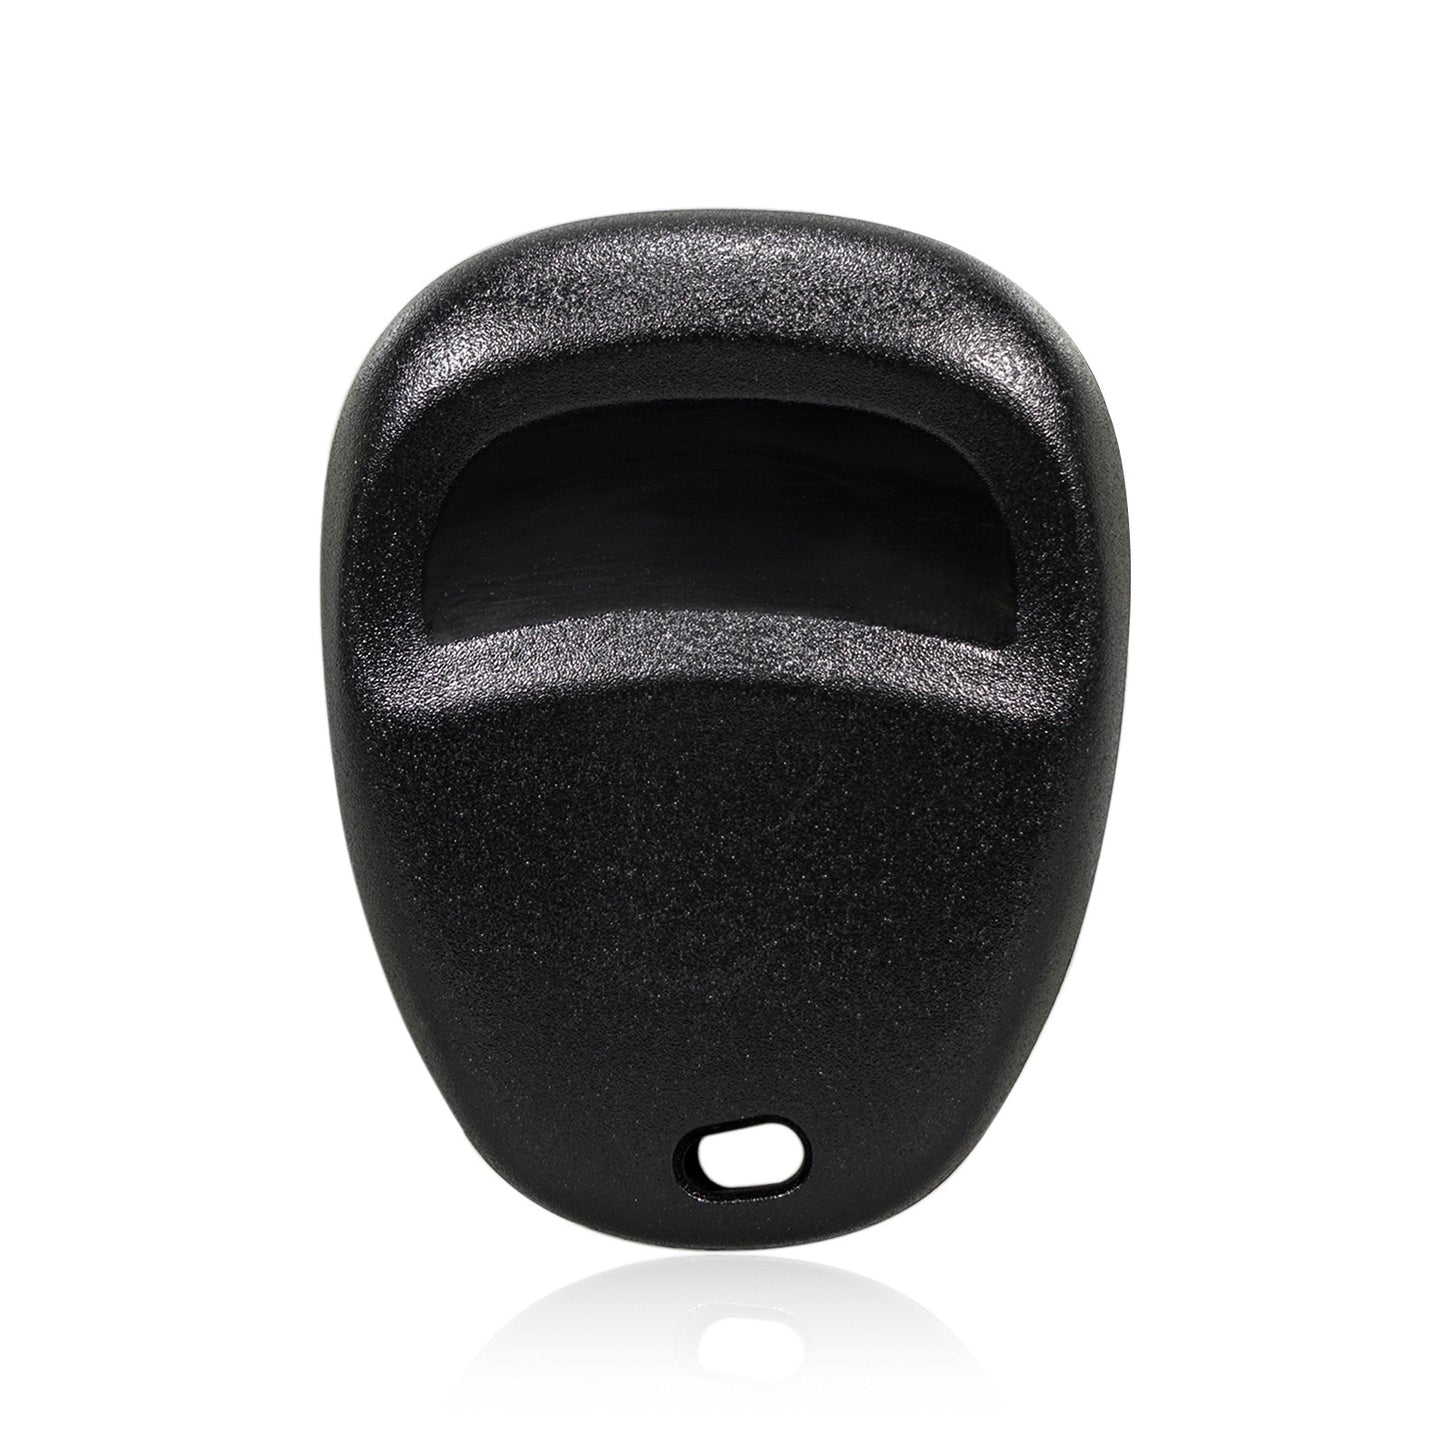 4 Buttons 315MHz Keyless Entry Fob Remote Car Key For 2000-2011 Chevrolet Malibu (2 possible remotes, must match GM part) Cavalier FCC ID: L2C0005T SKU : J254